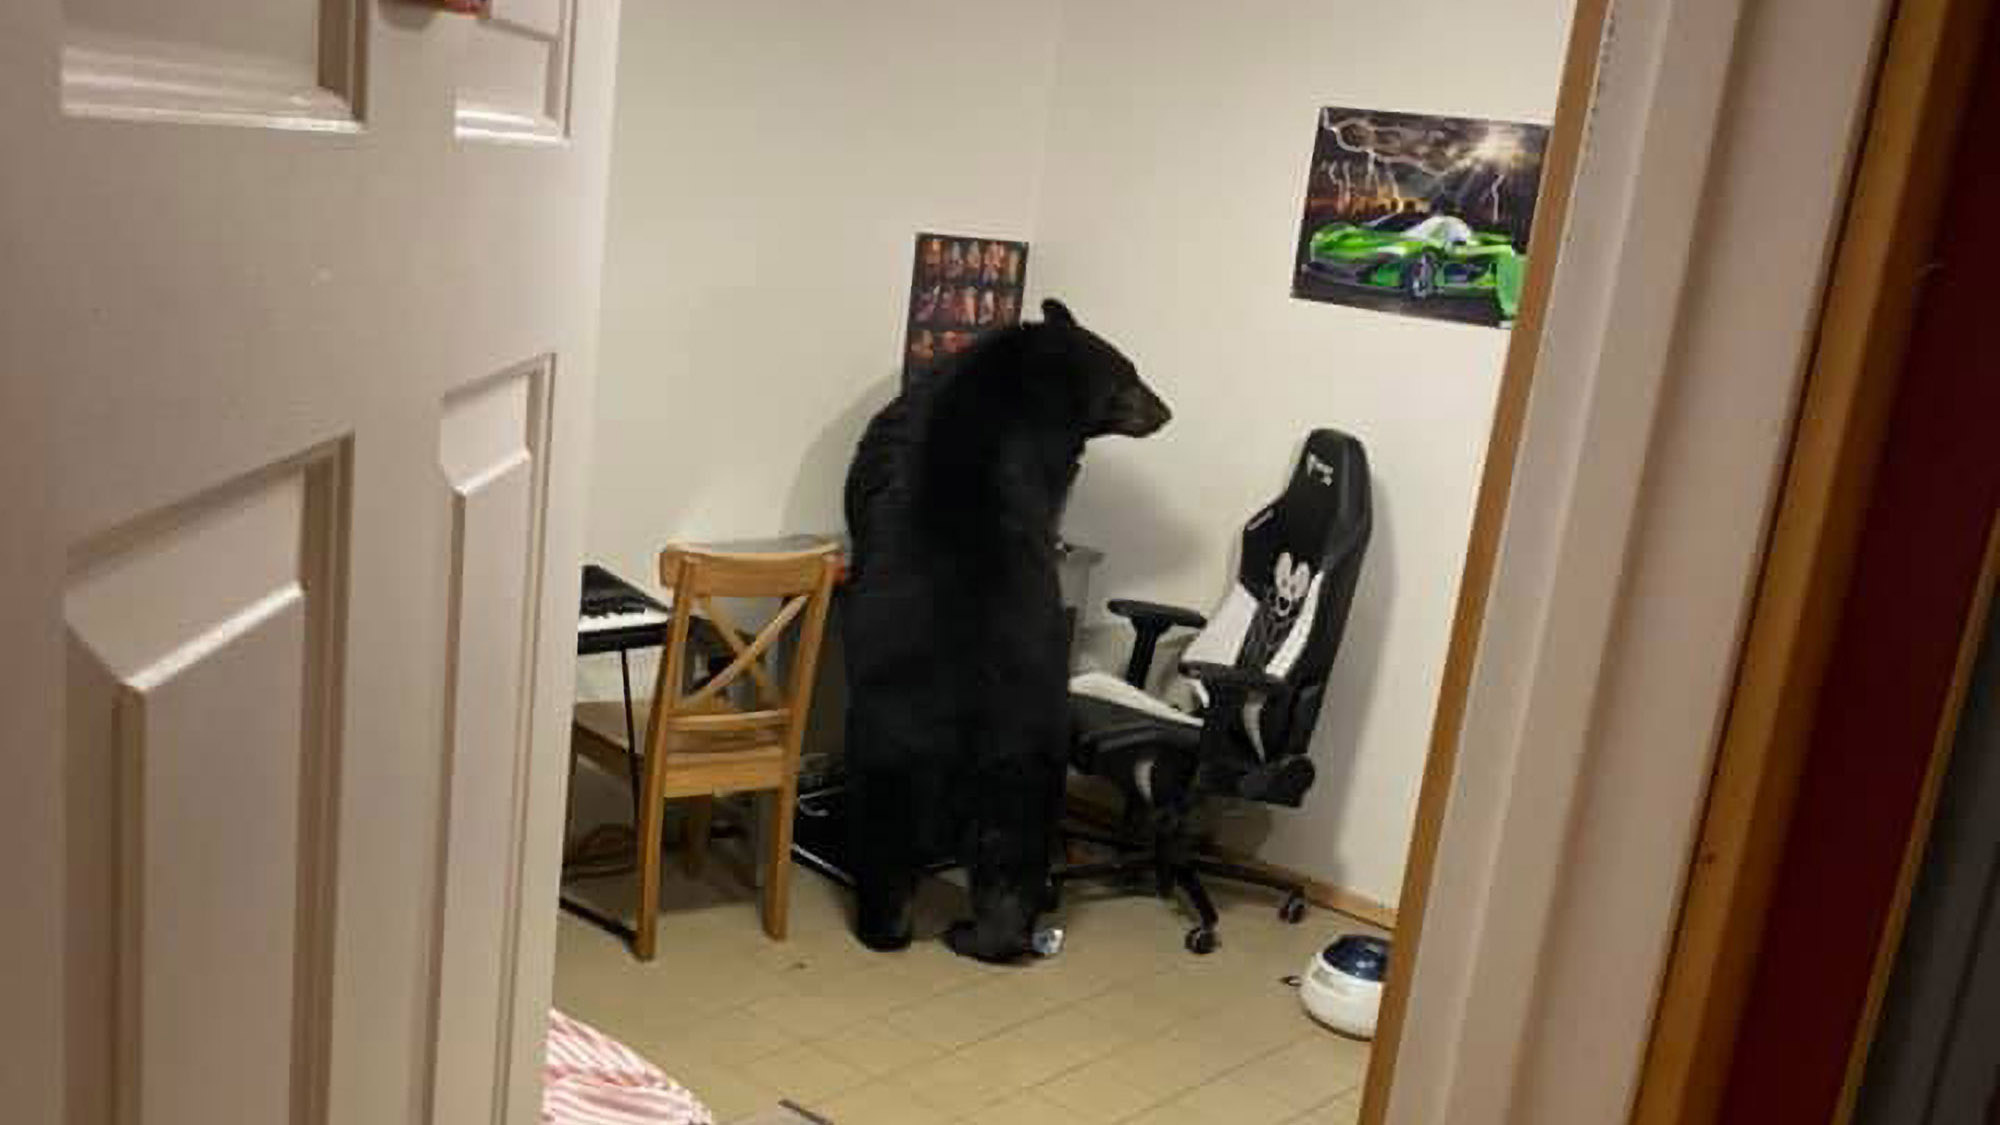 Read more about the article Huge Black Bear Breaks Into Familys House And Jumps On Boys Gaming Gear